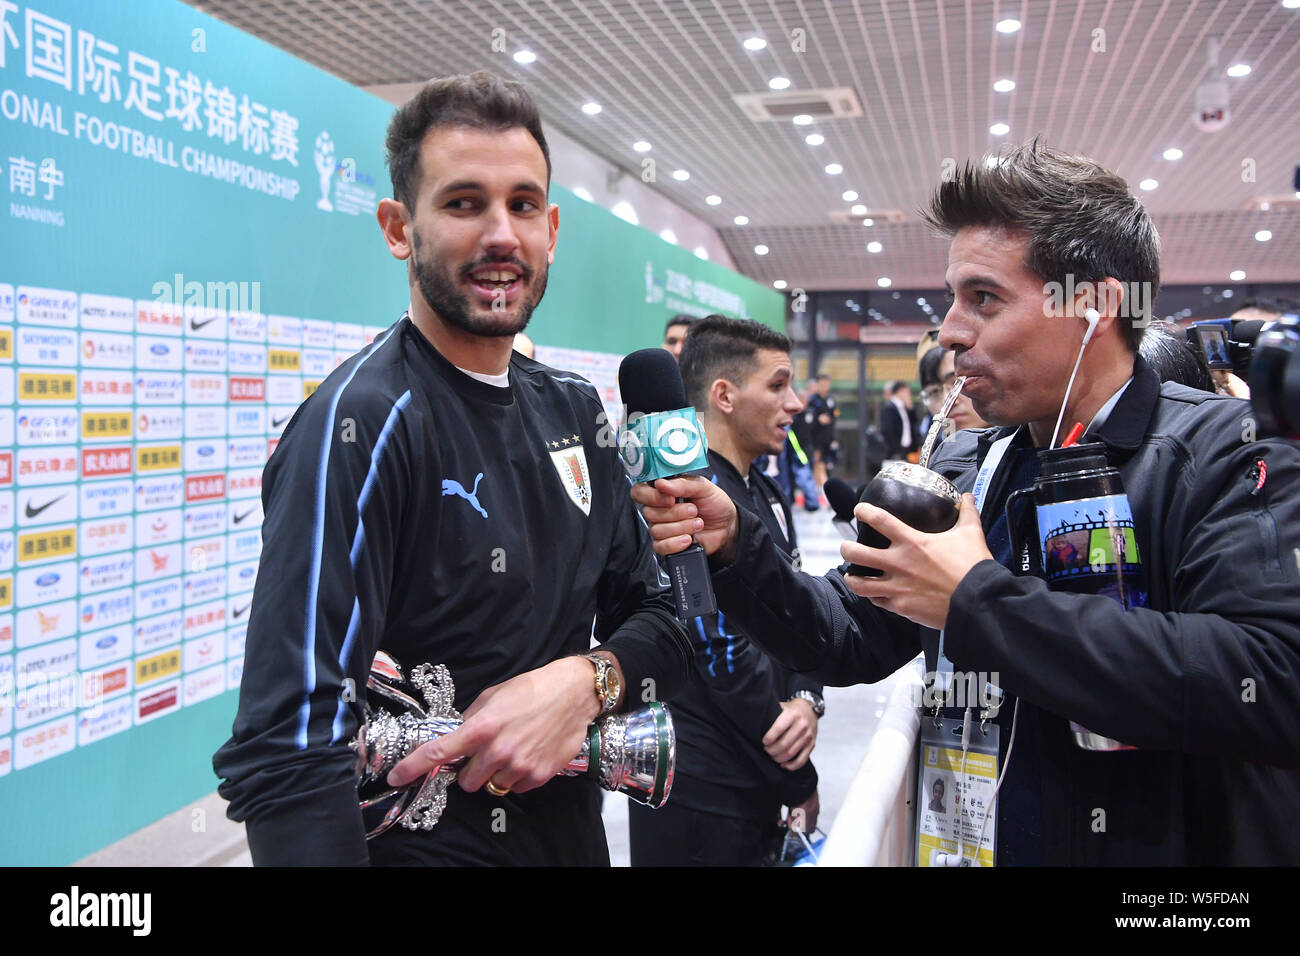 Cristhian Stuani of Uruguay national football team is interviewed after defeating Thailand national football team for the 2019 China Cup International Stock Photo